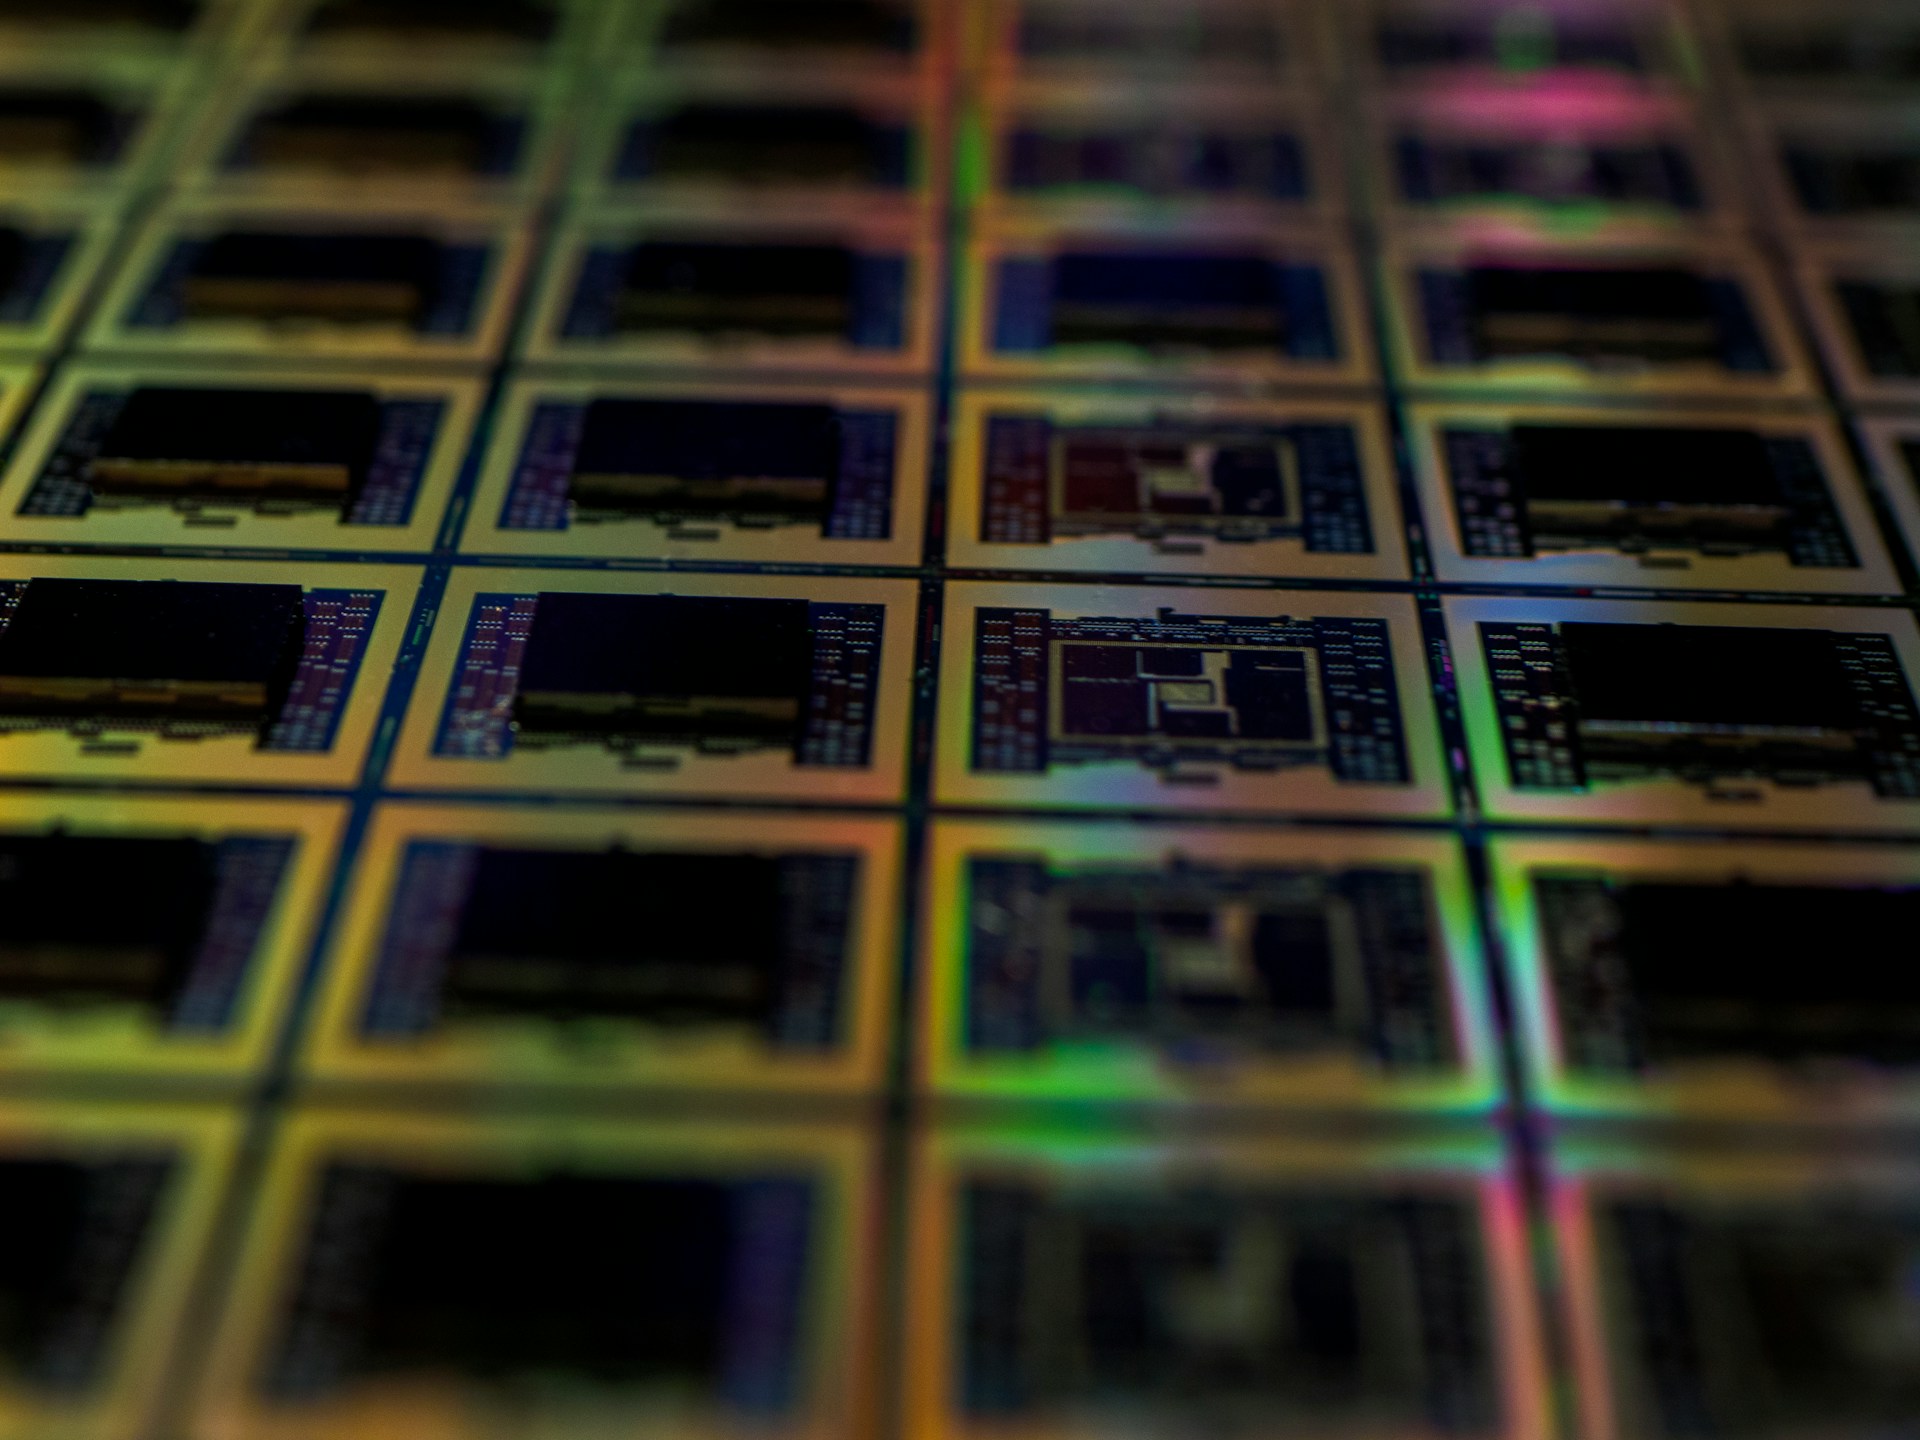 Close-up image of semiconductor wafers with intricate circuitry patterns.